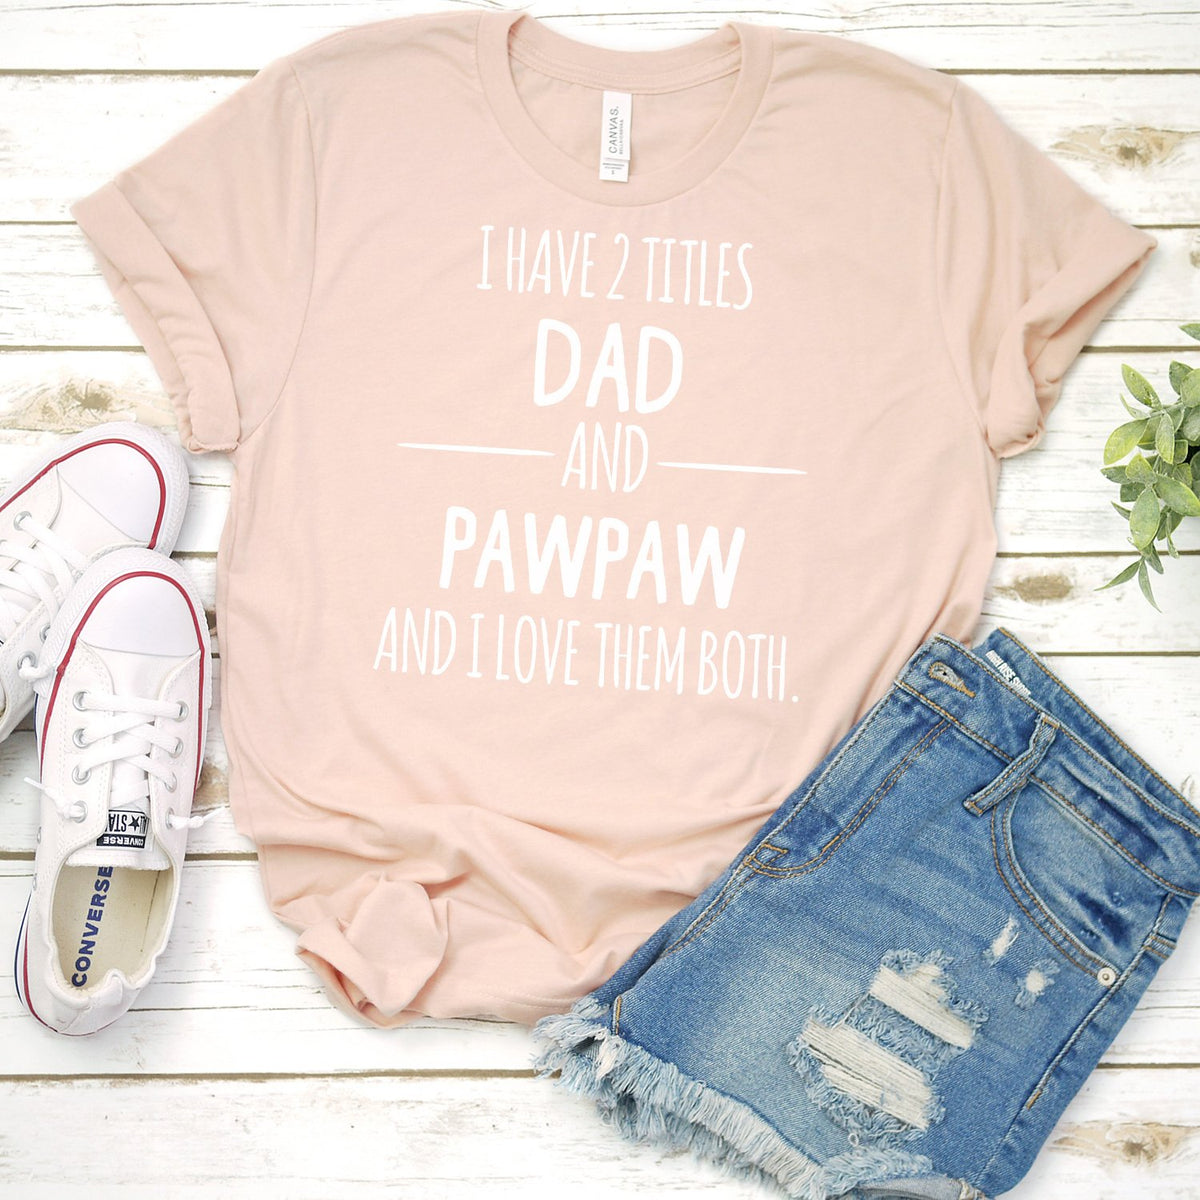 I Have 2 Titles Dad and PawPaw and I Love Them Both - Short Sleeve Tee Shirt